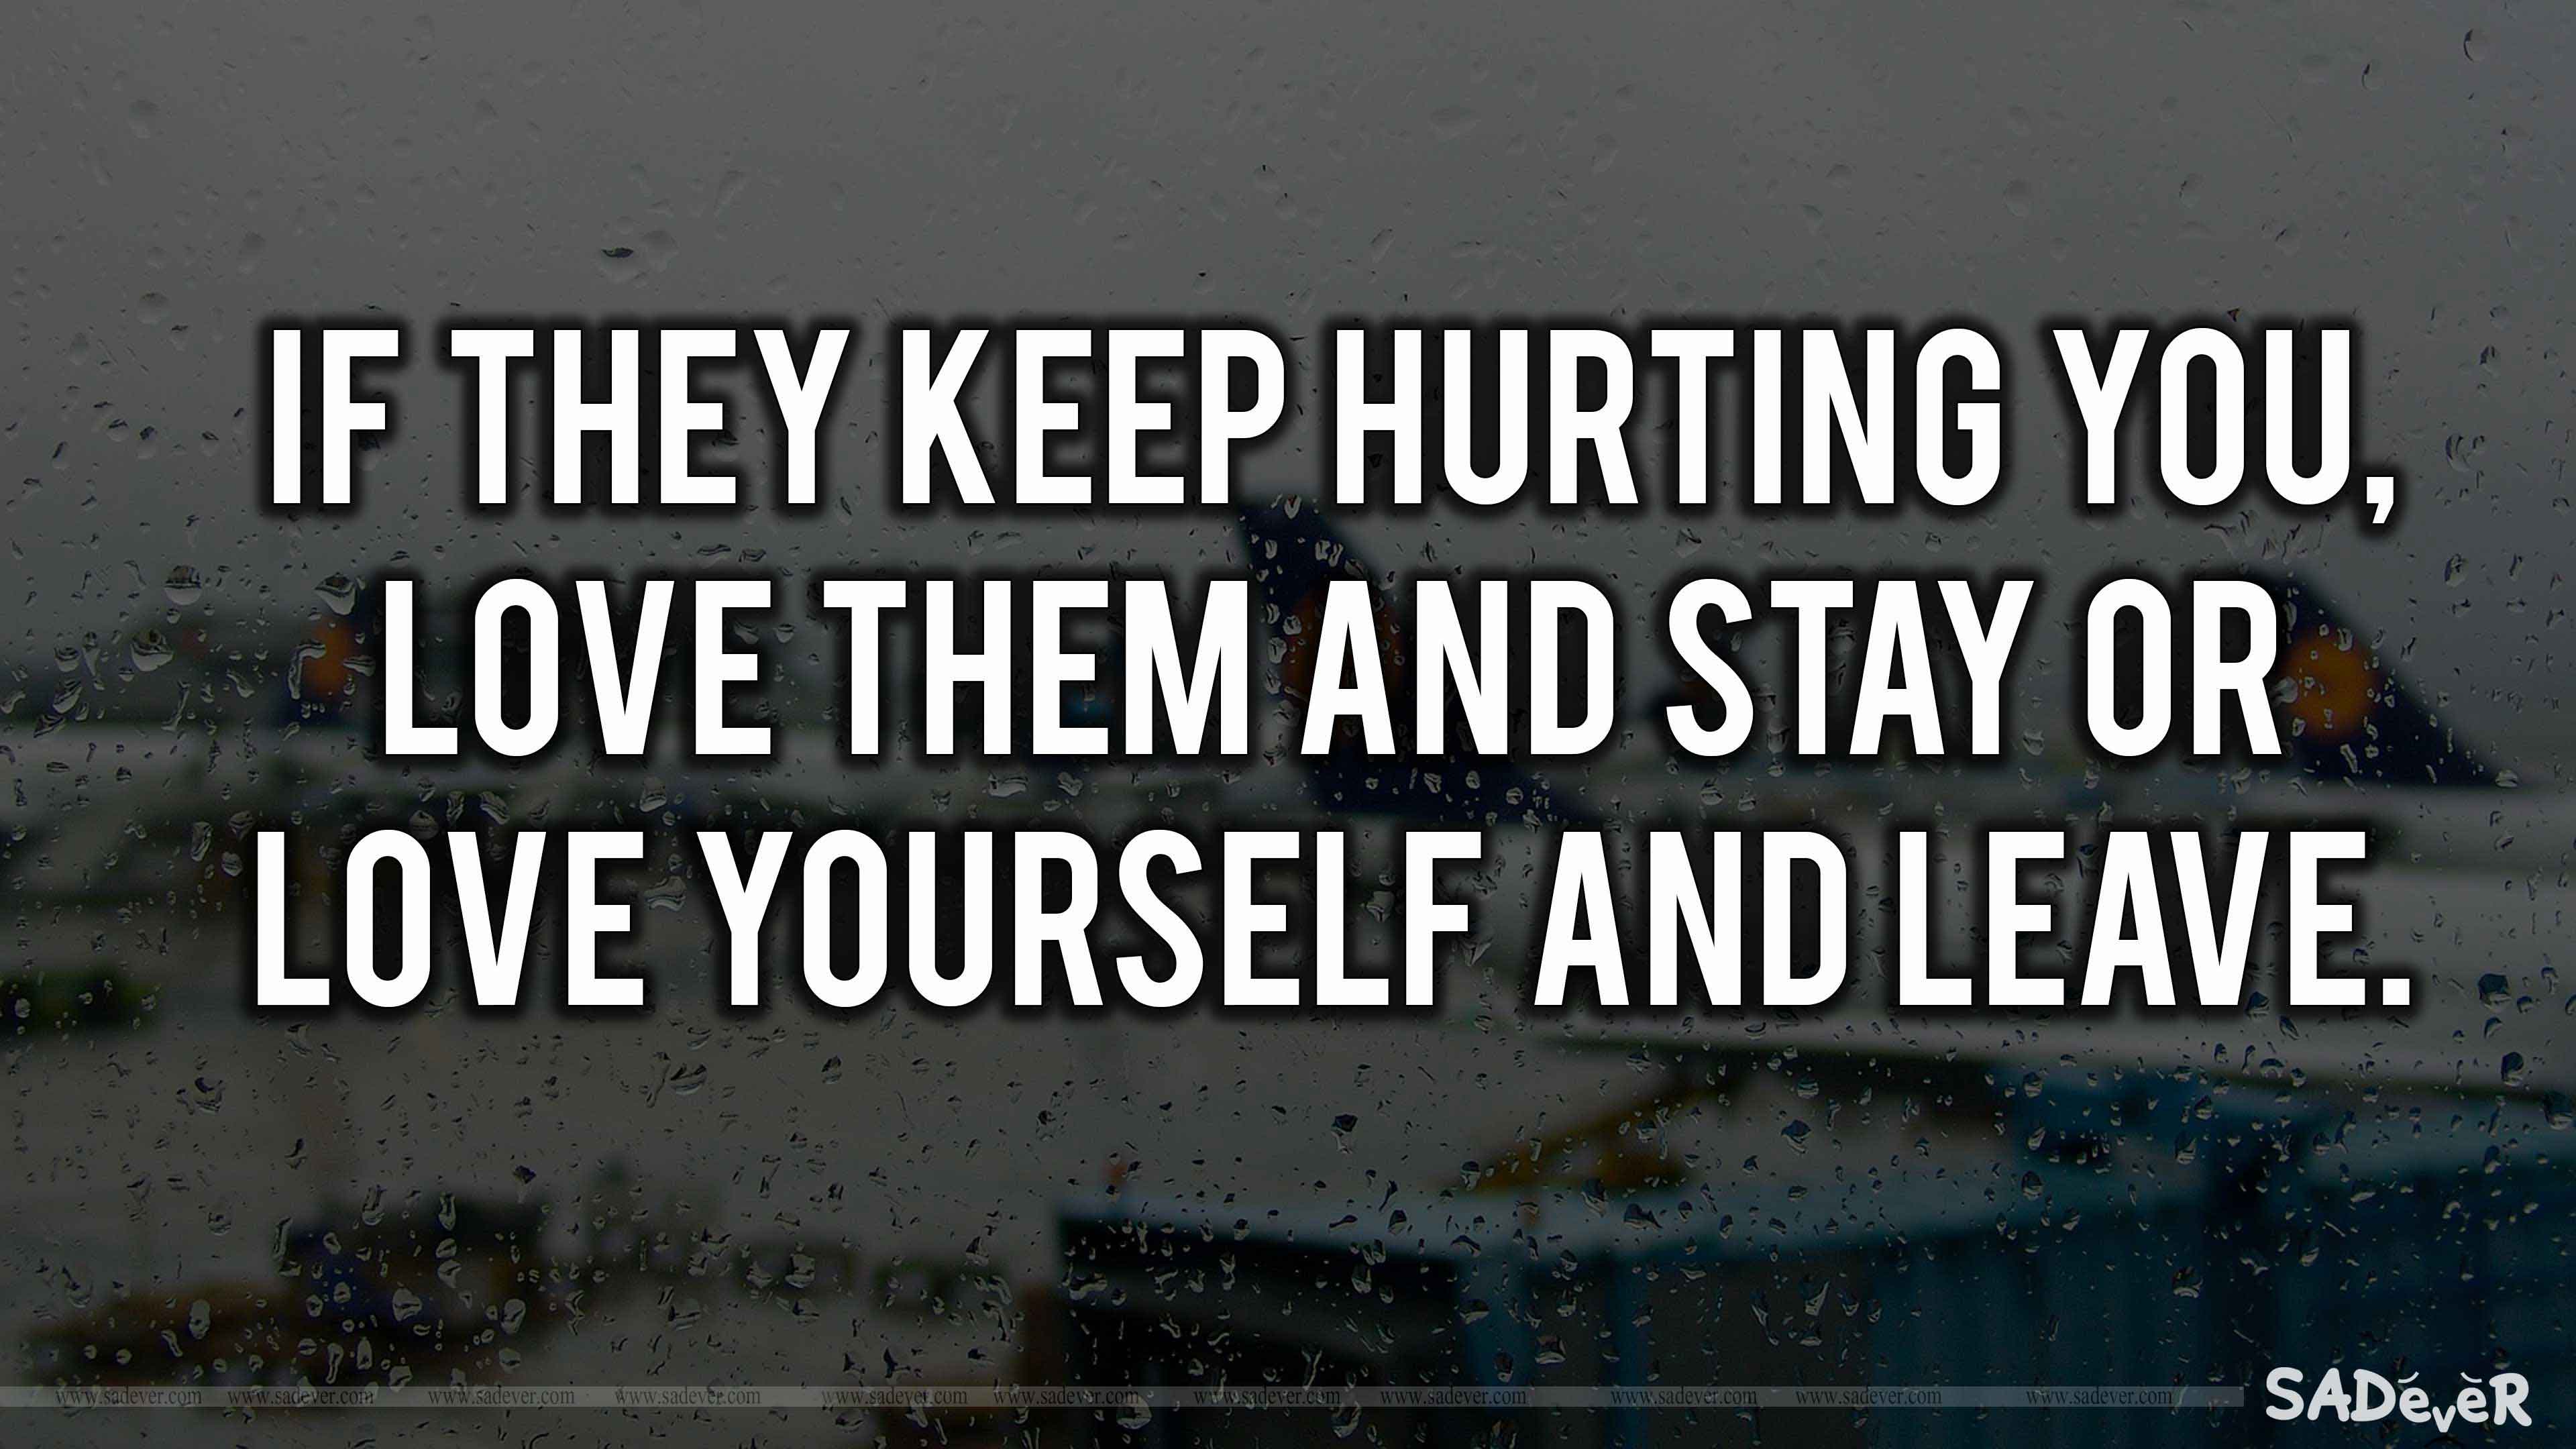 Hurting Quotes Image. Love Hurts Quotes